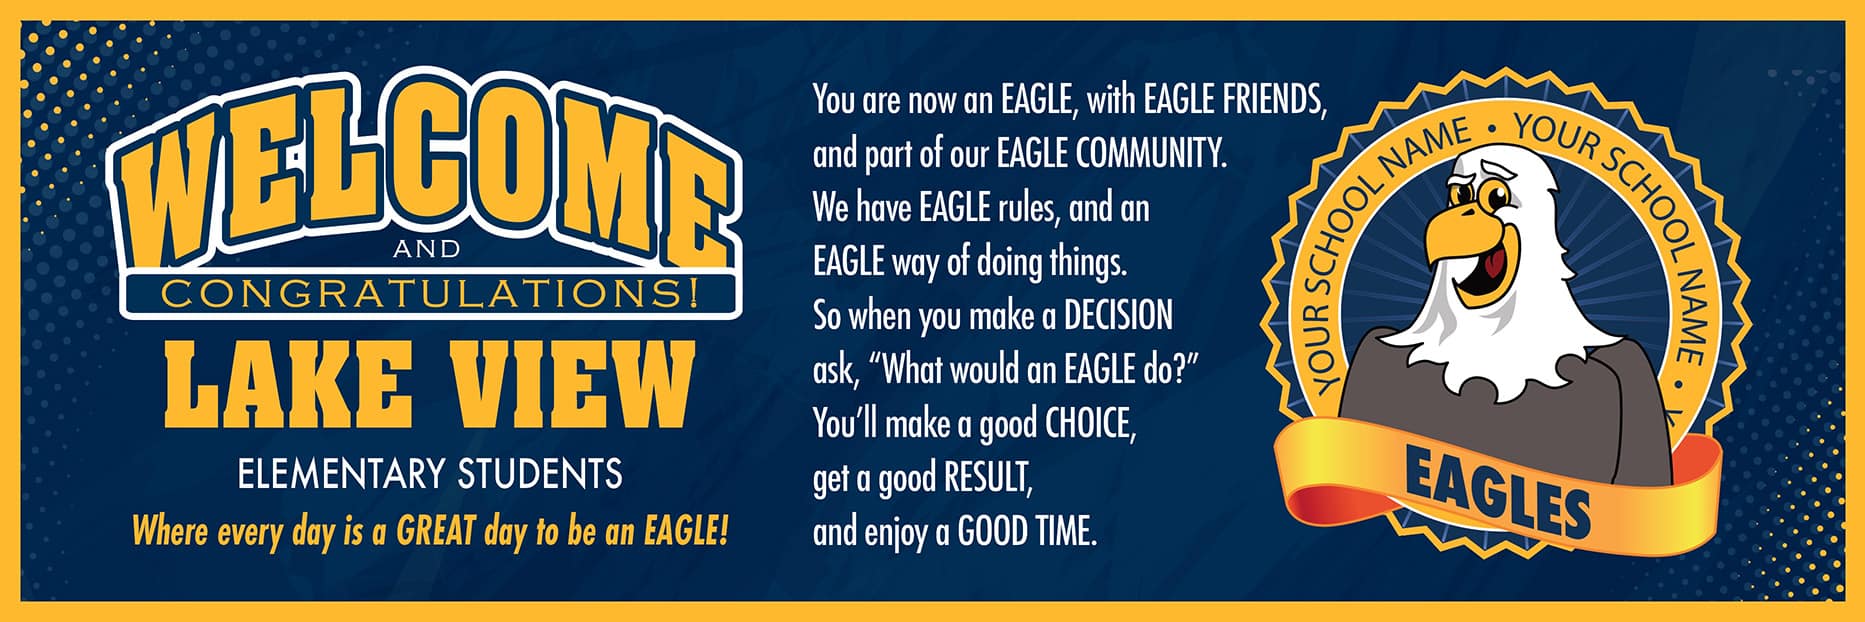 Welcome-Message-banner-eagle3